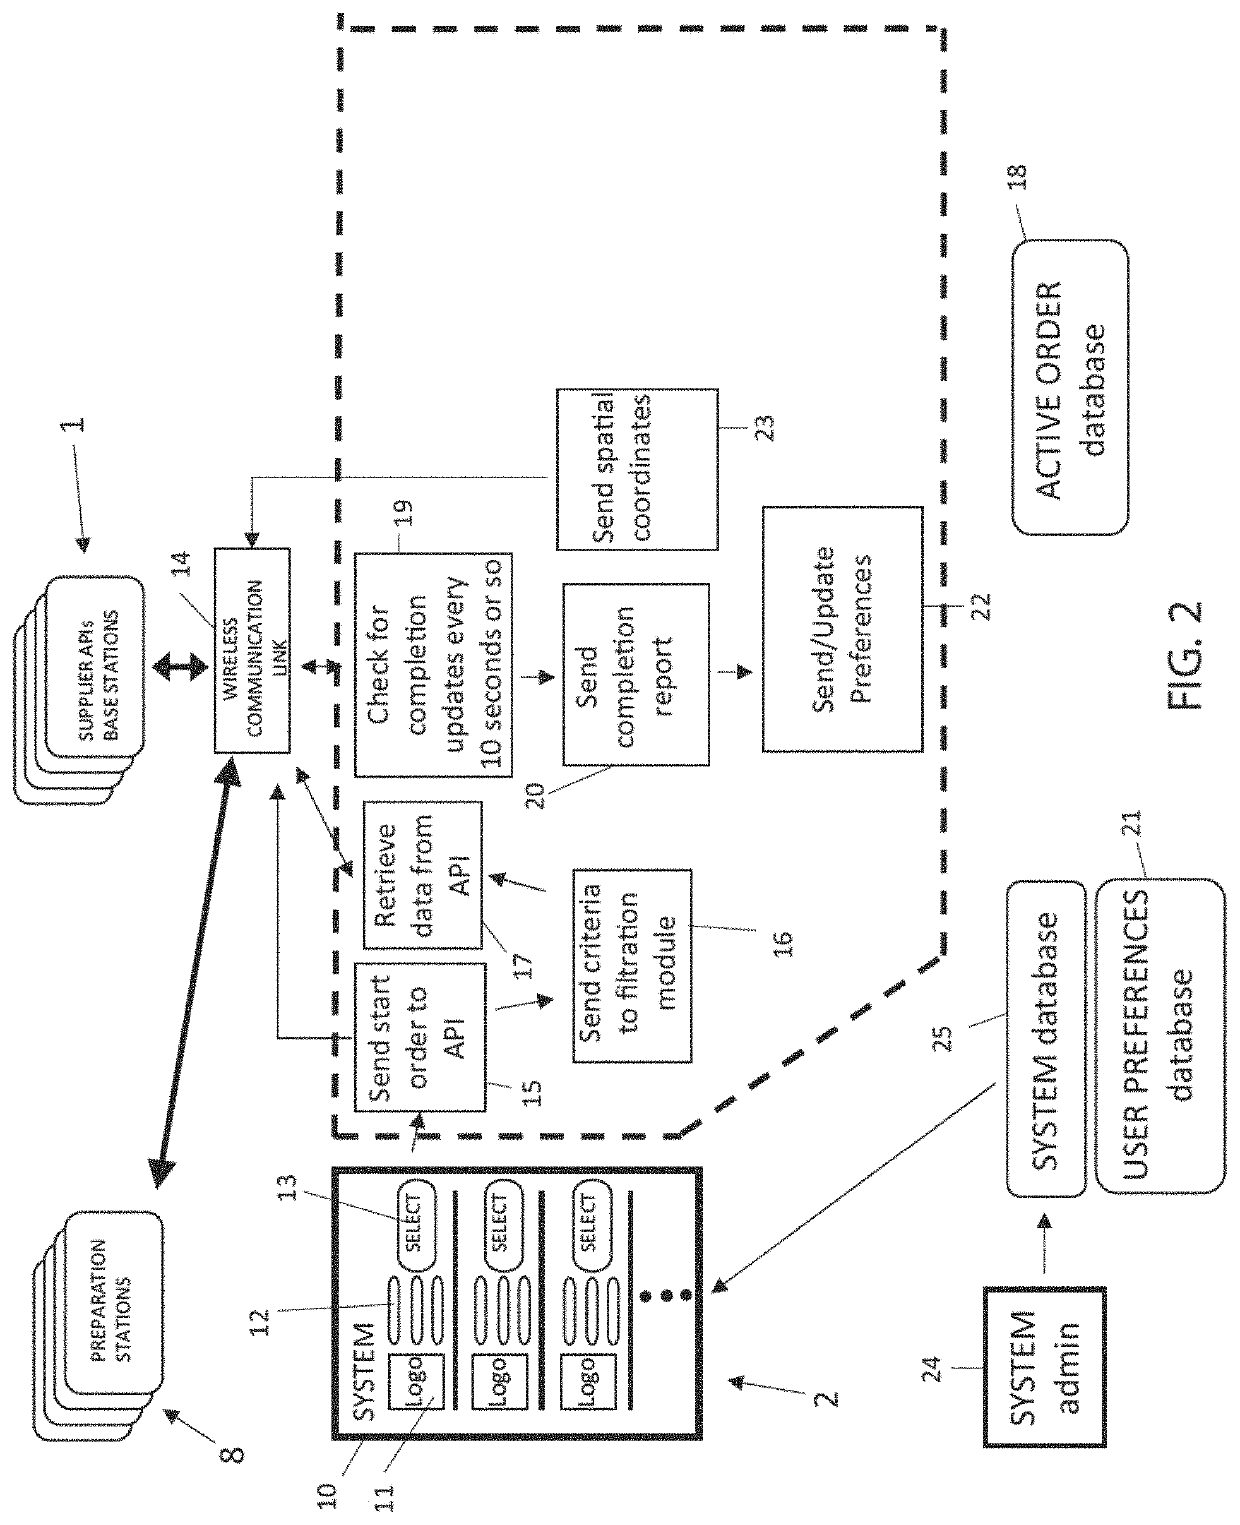 System of food and/or beverage preparation, communication applications and/or units